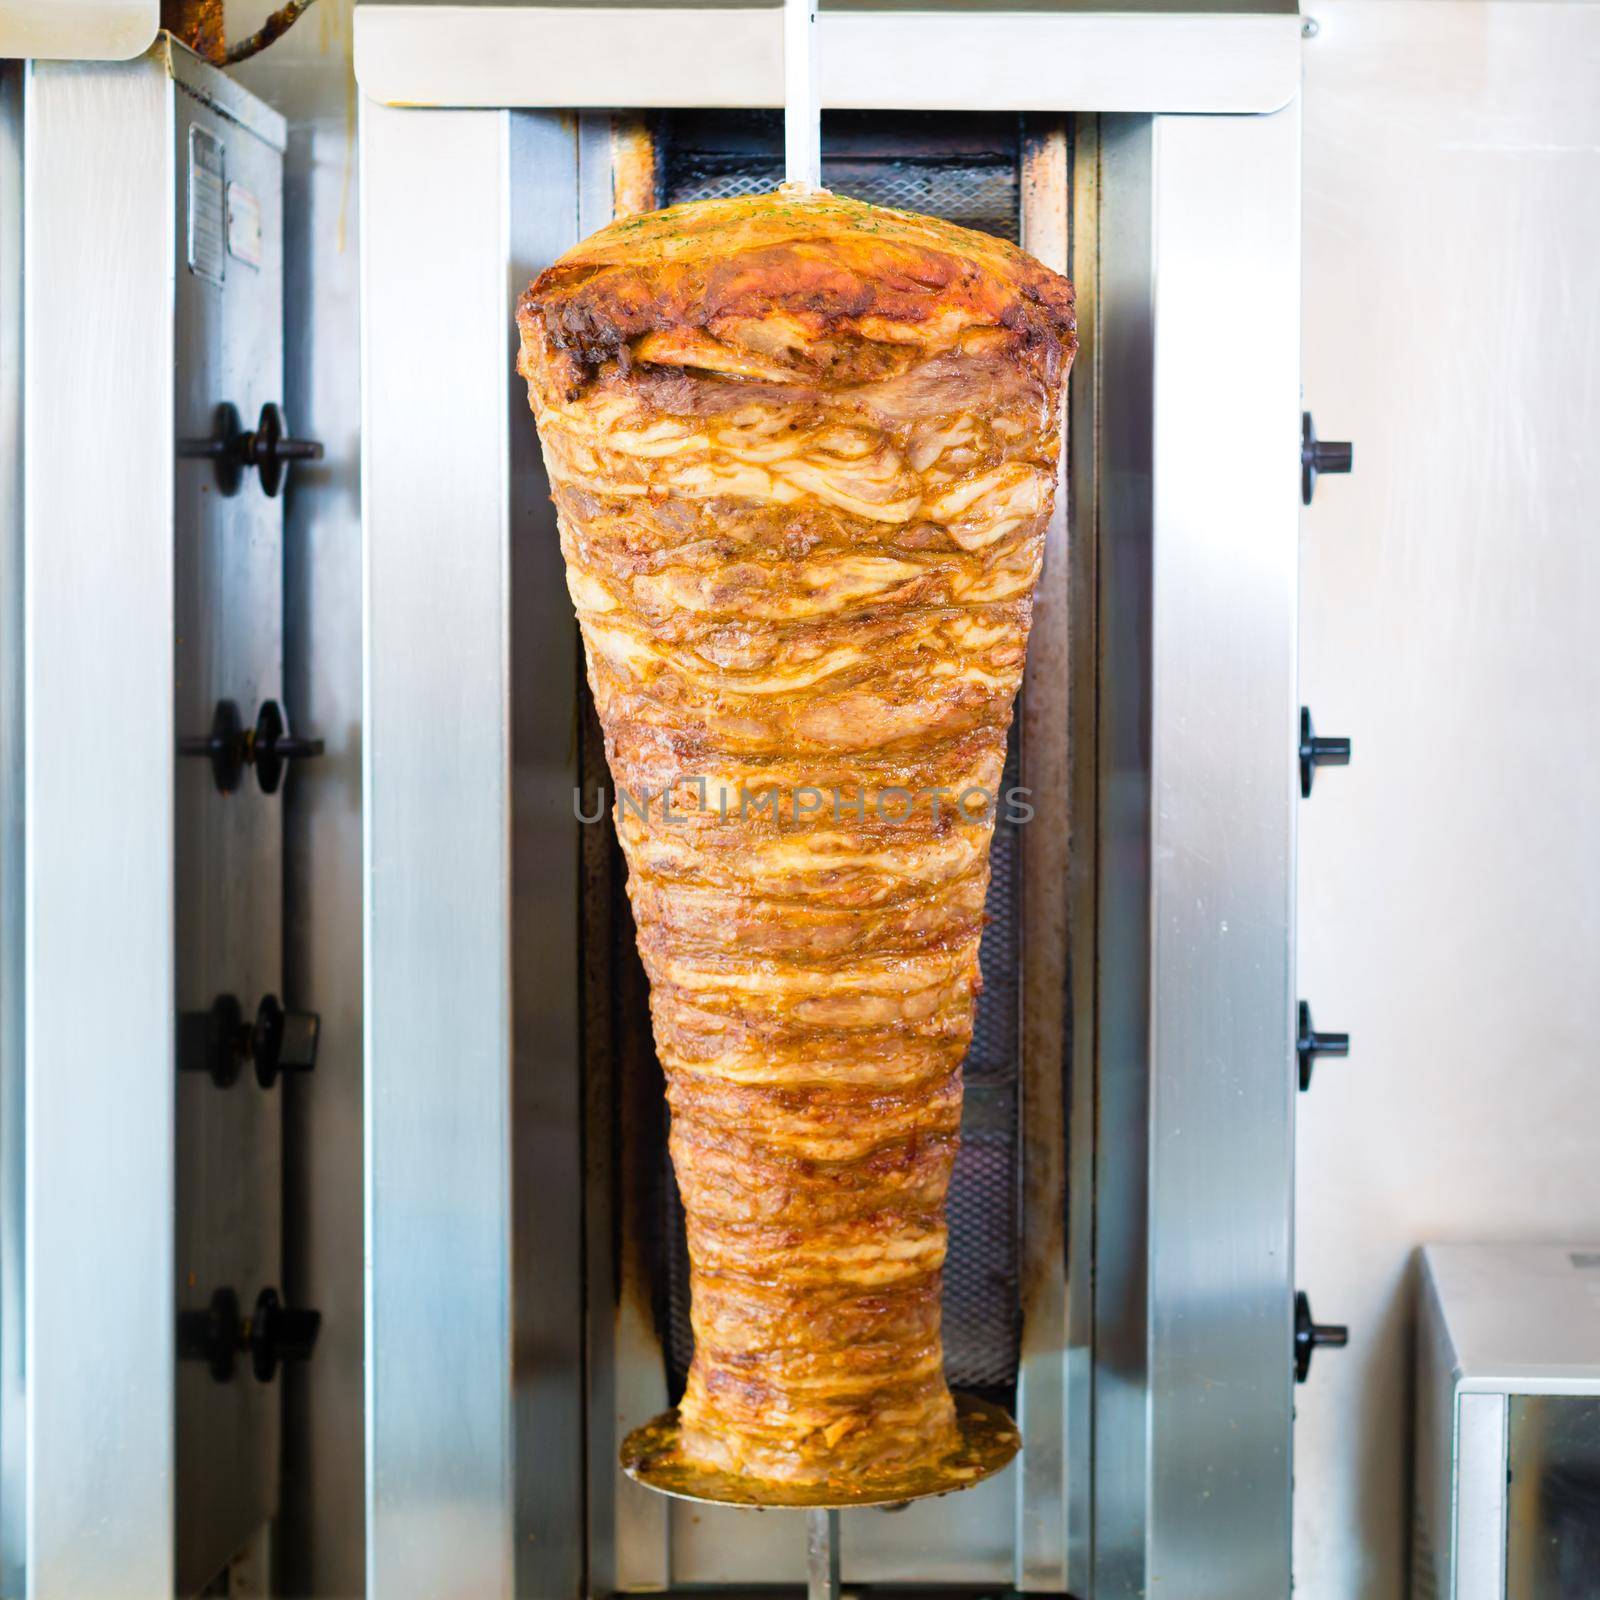 Doner kebab - hot and fresh meat skewer in Turkish fast food eatery